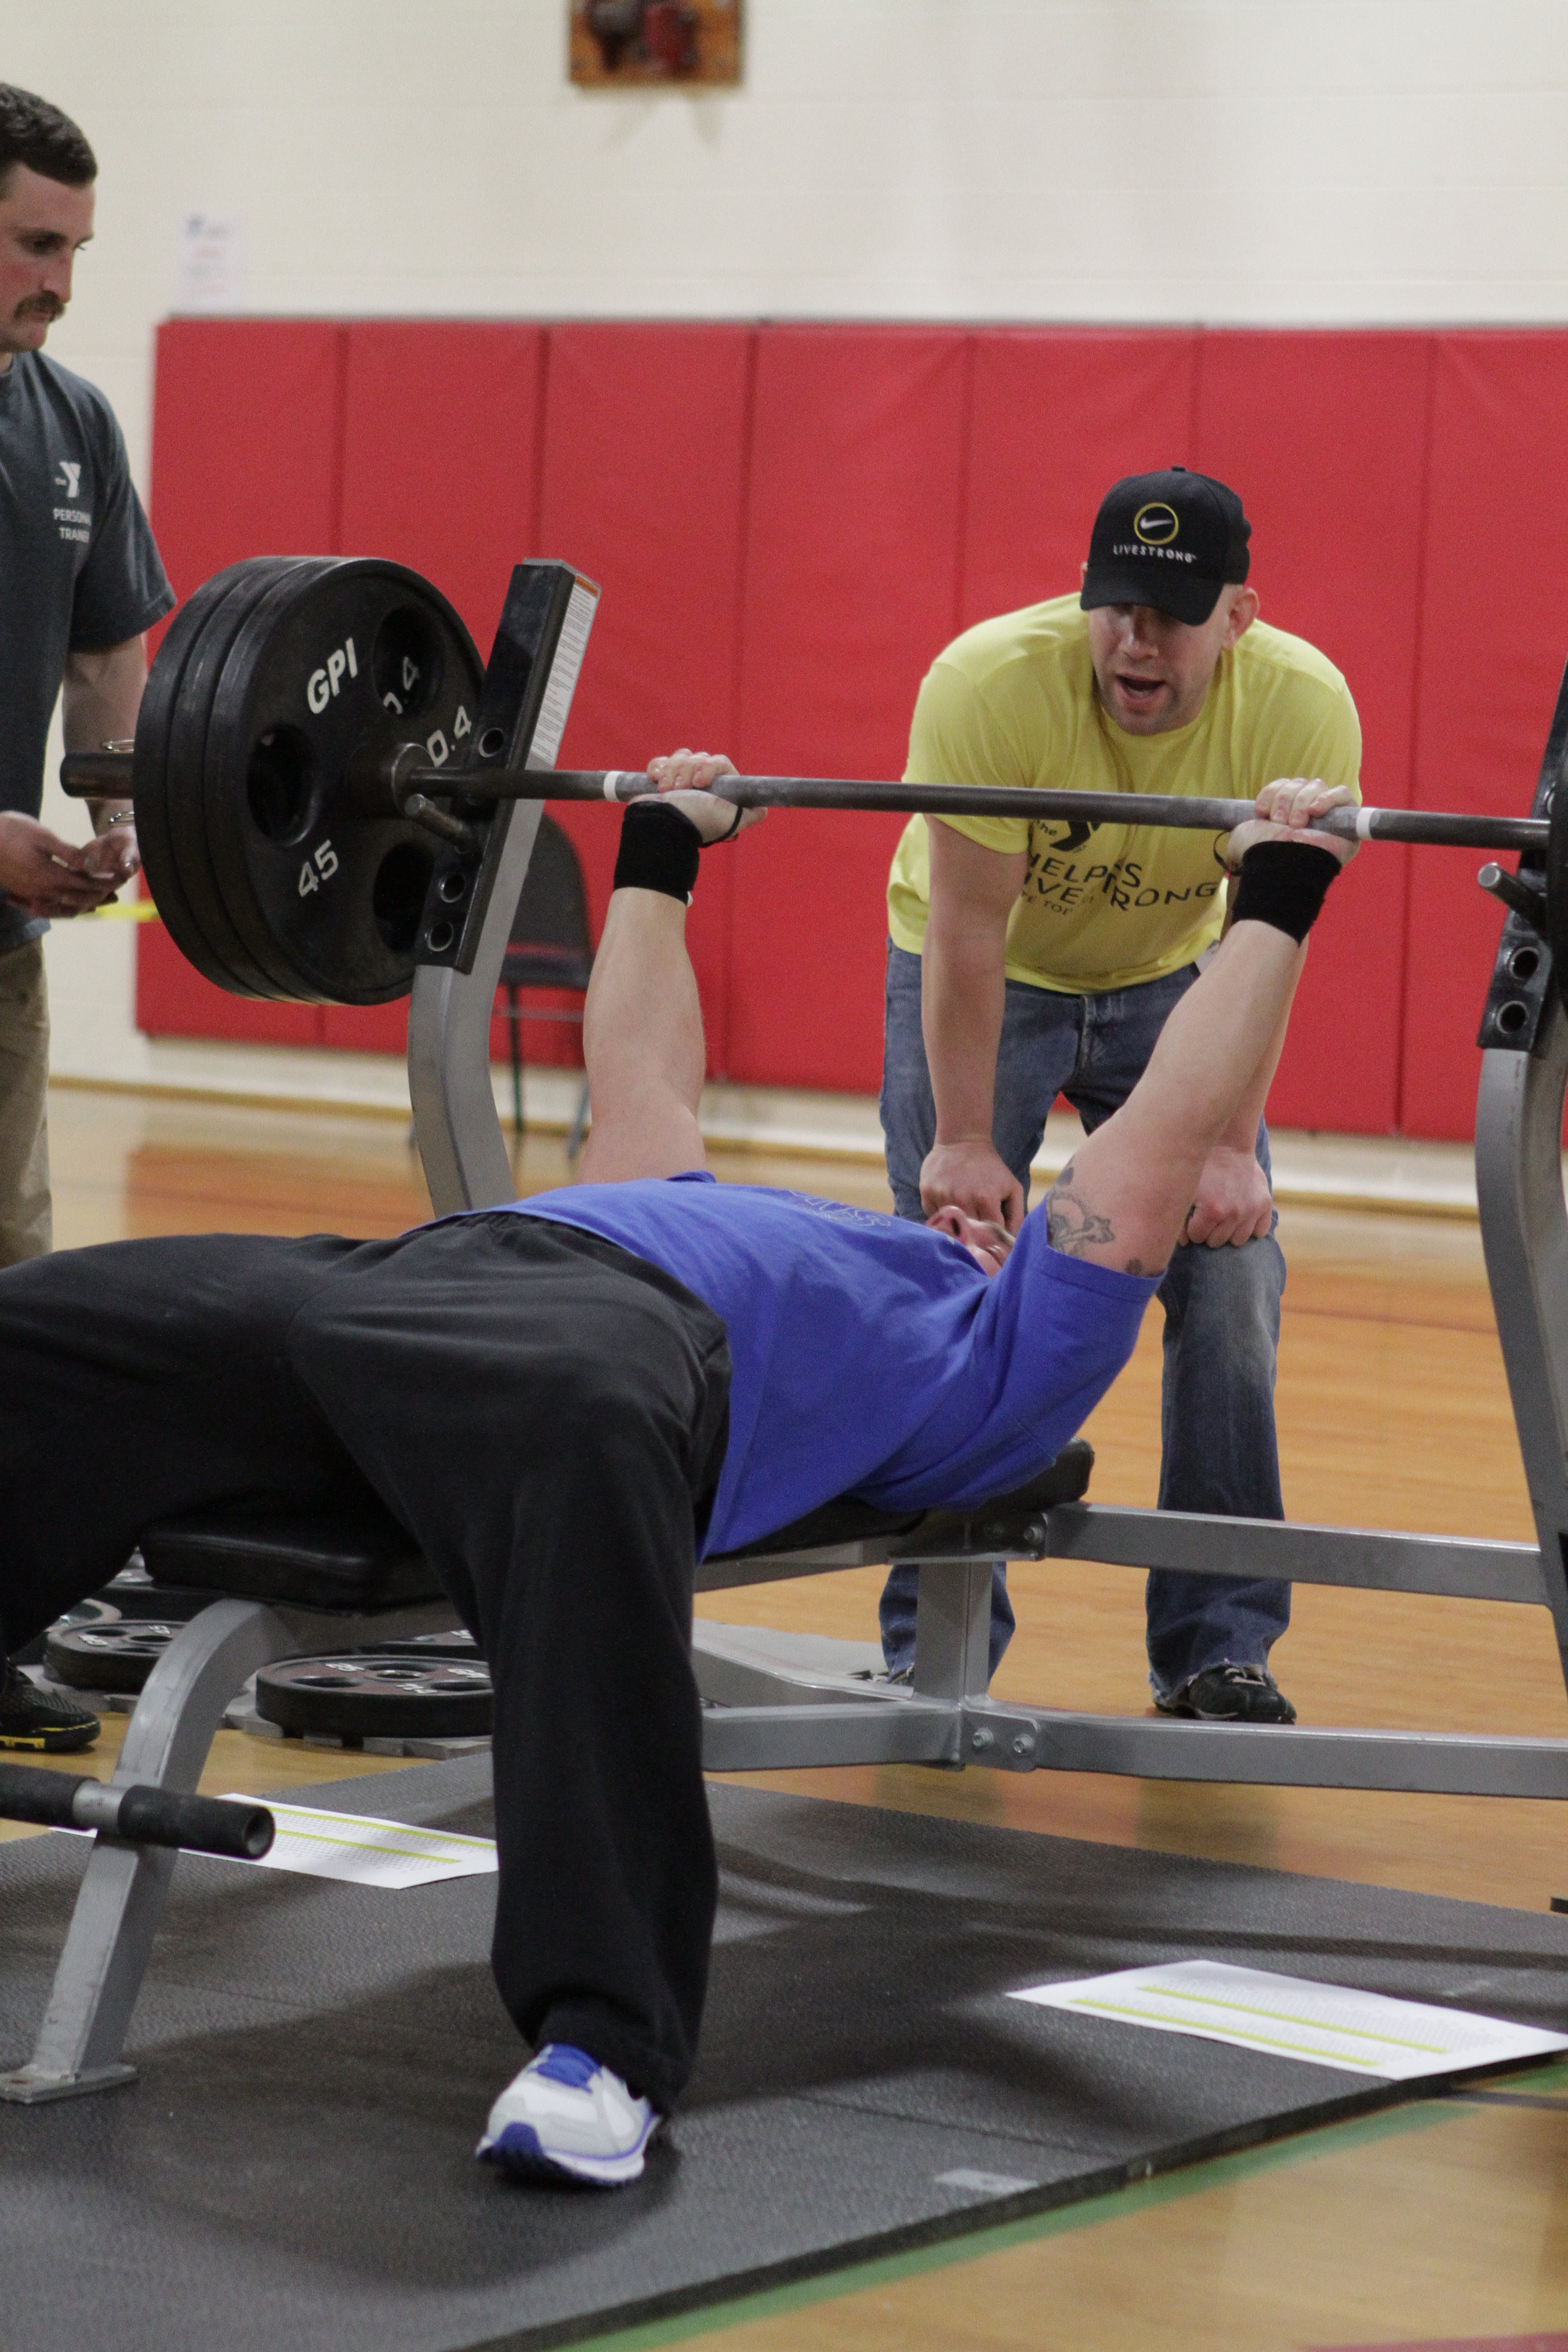 Bench press competition at Southington YMCA, photo by Miceli Productions